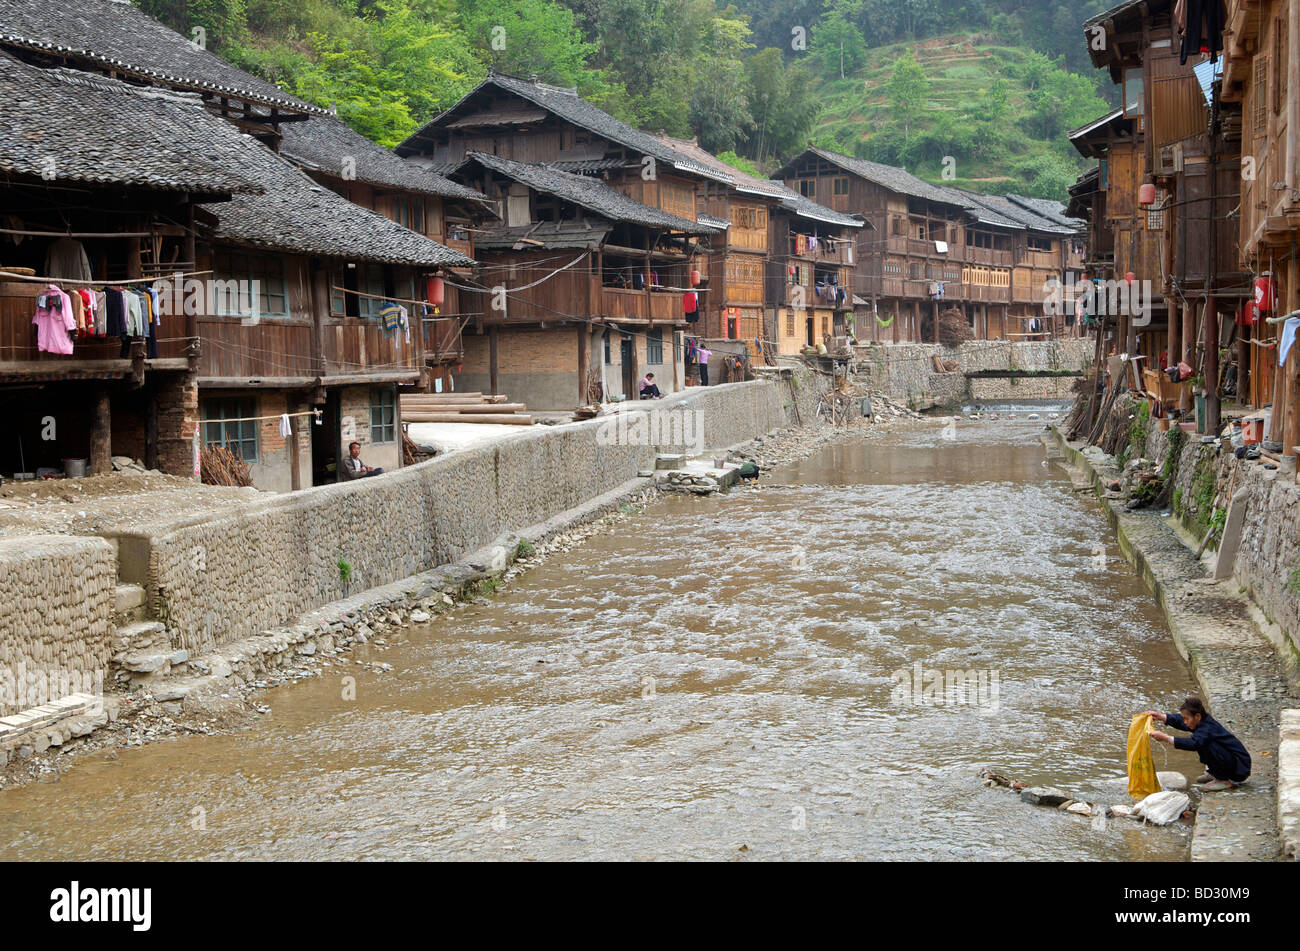 Typical wooden buildings characterize a Dong Village Zhaoxing Guizhou Province China Stock Photo